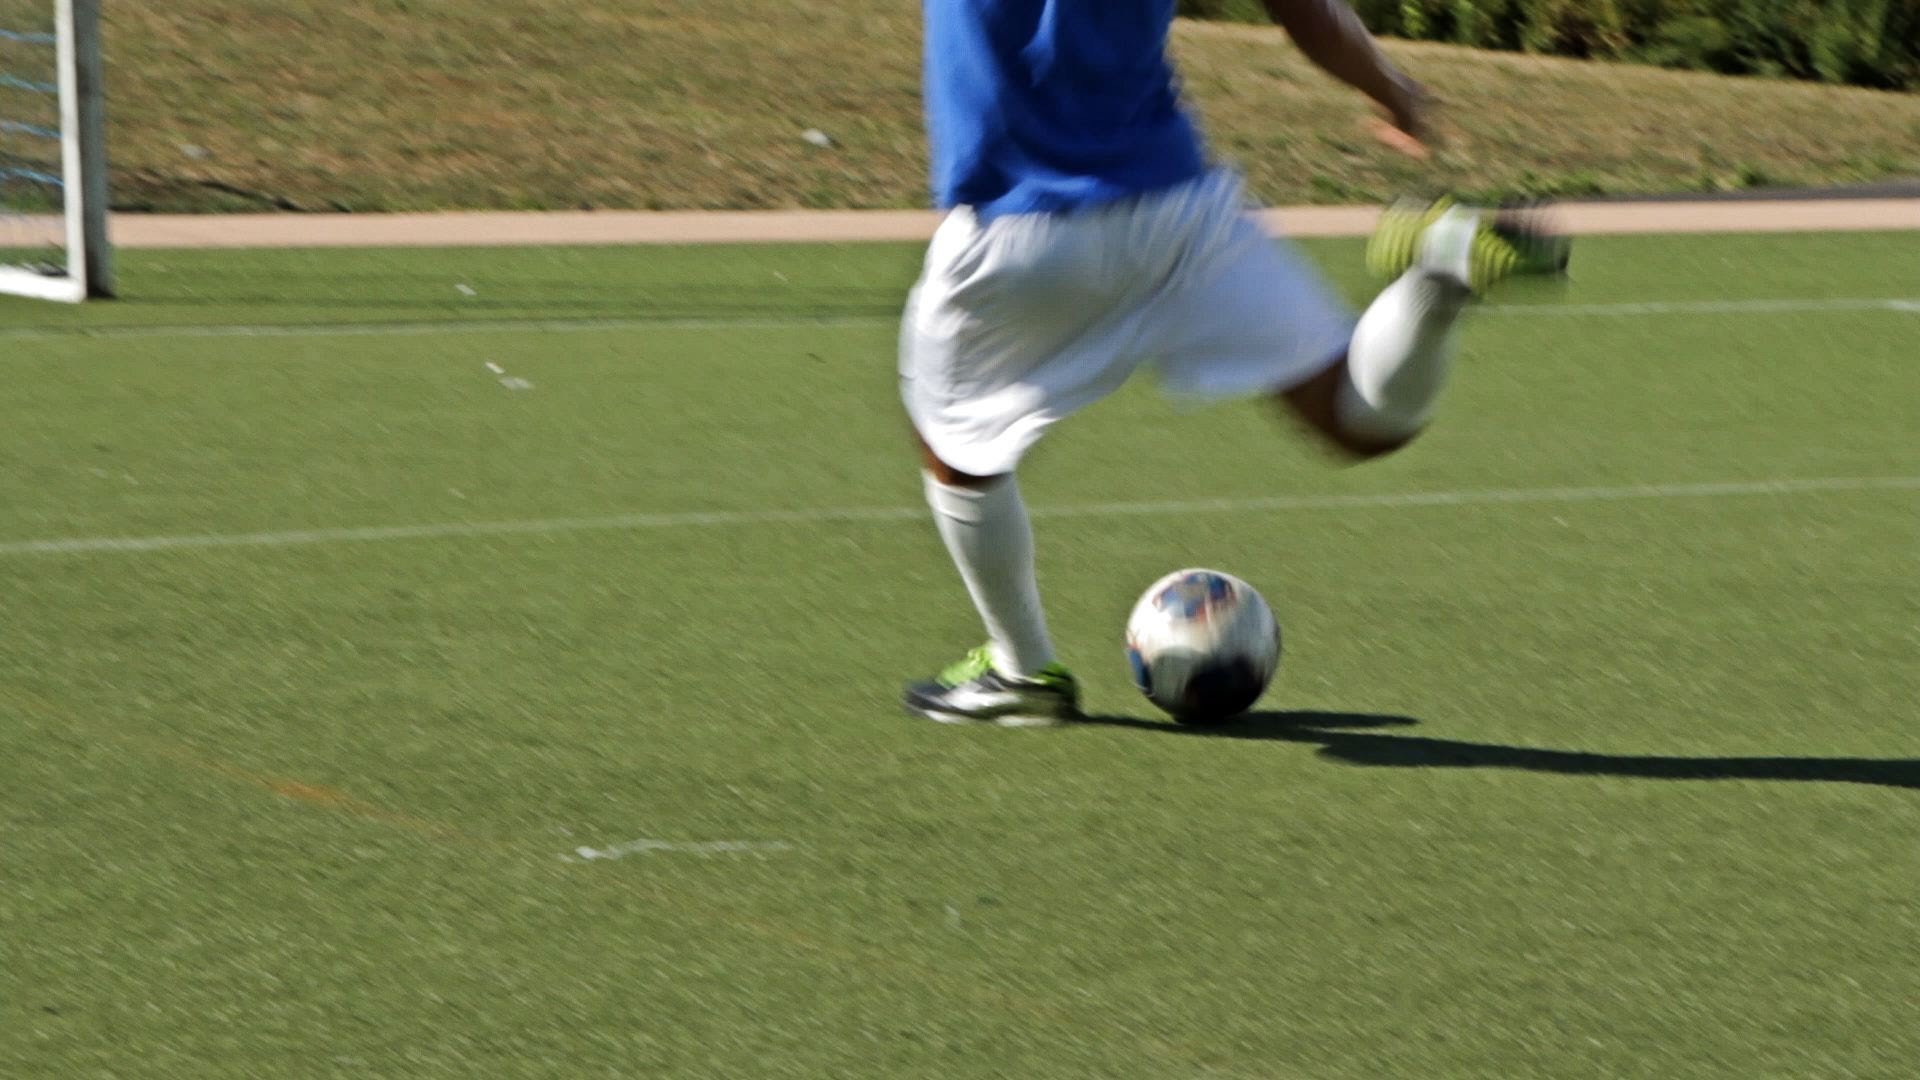 How to Shoot a Soccer Ball | Soccer Skills - YouTube